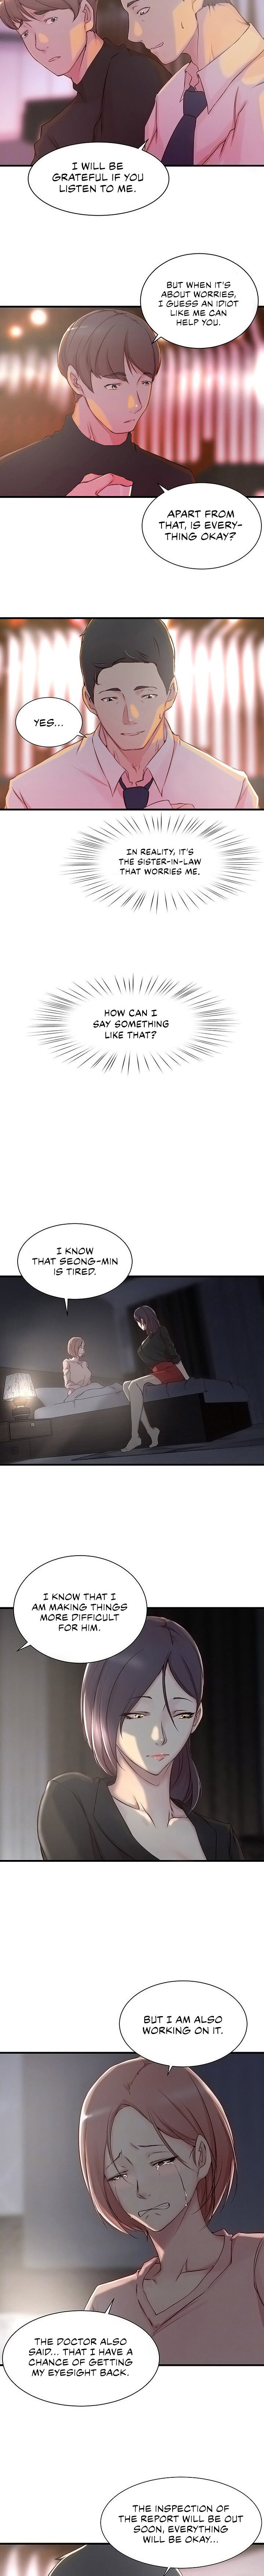 Sister-in-Law Manhwa - Chapter 5 Page 3